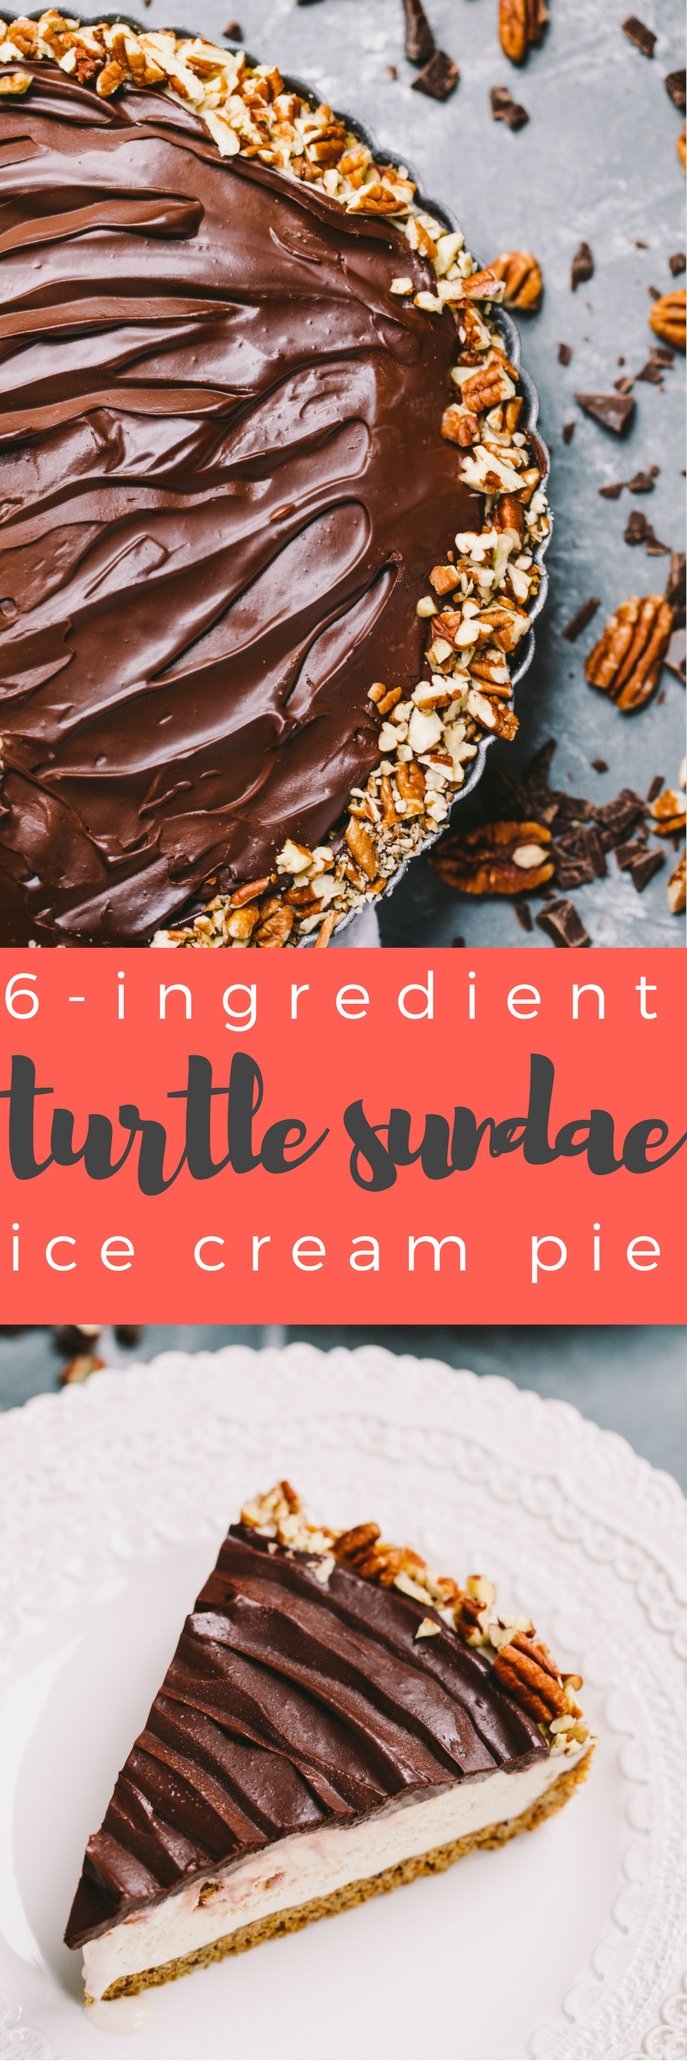 an ice cream pie & a turtle sundae all in one! this turtle sundae ice cream pie starts with a pecan-graham cracker crust, is filled with salted caramel ice cream, & is topped off with a thick, fudgy layer of dark chocolate ganache & roughly chopped pecans. 6 ingredients needed to make this turtle sundae ice cream pie - this salty sweet summer dessert couldn’t be easier or more delicious.